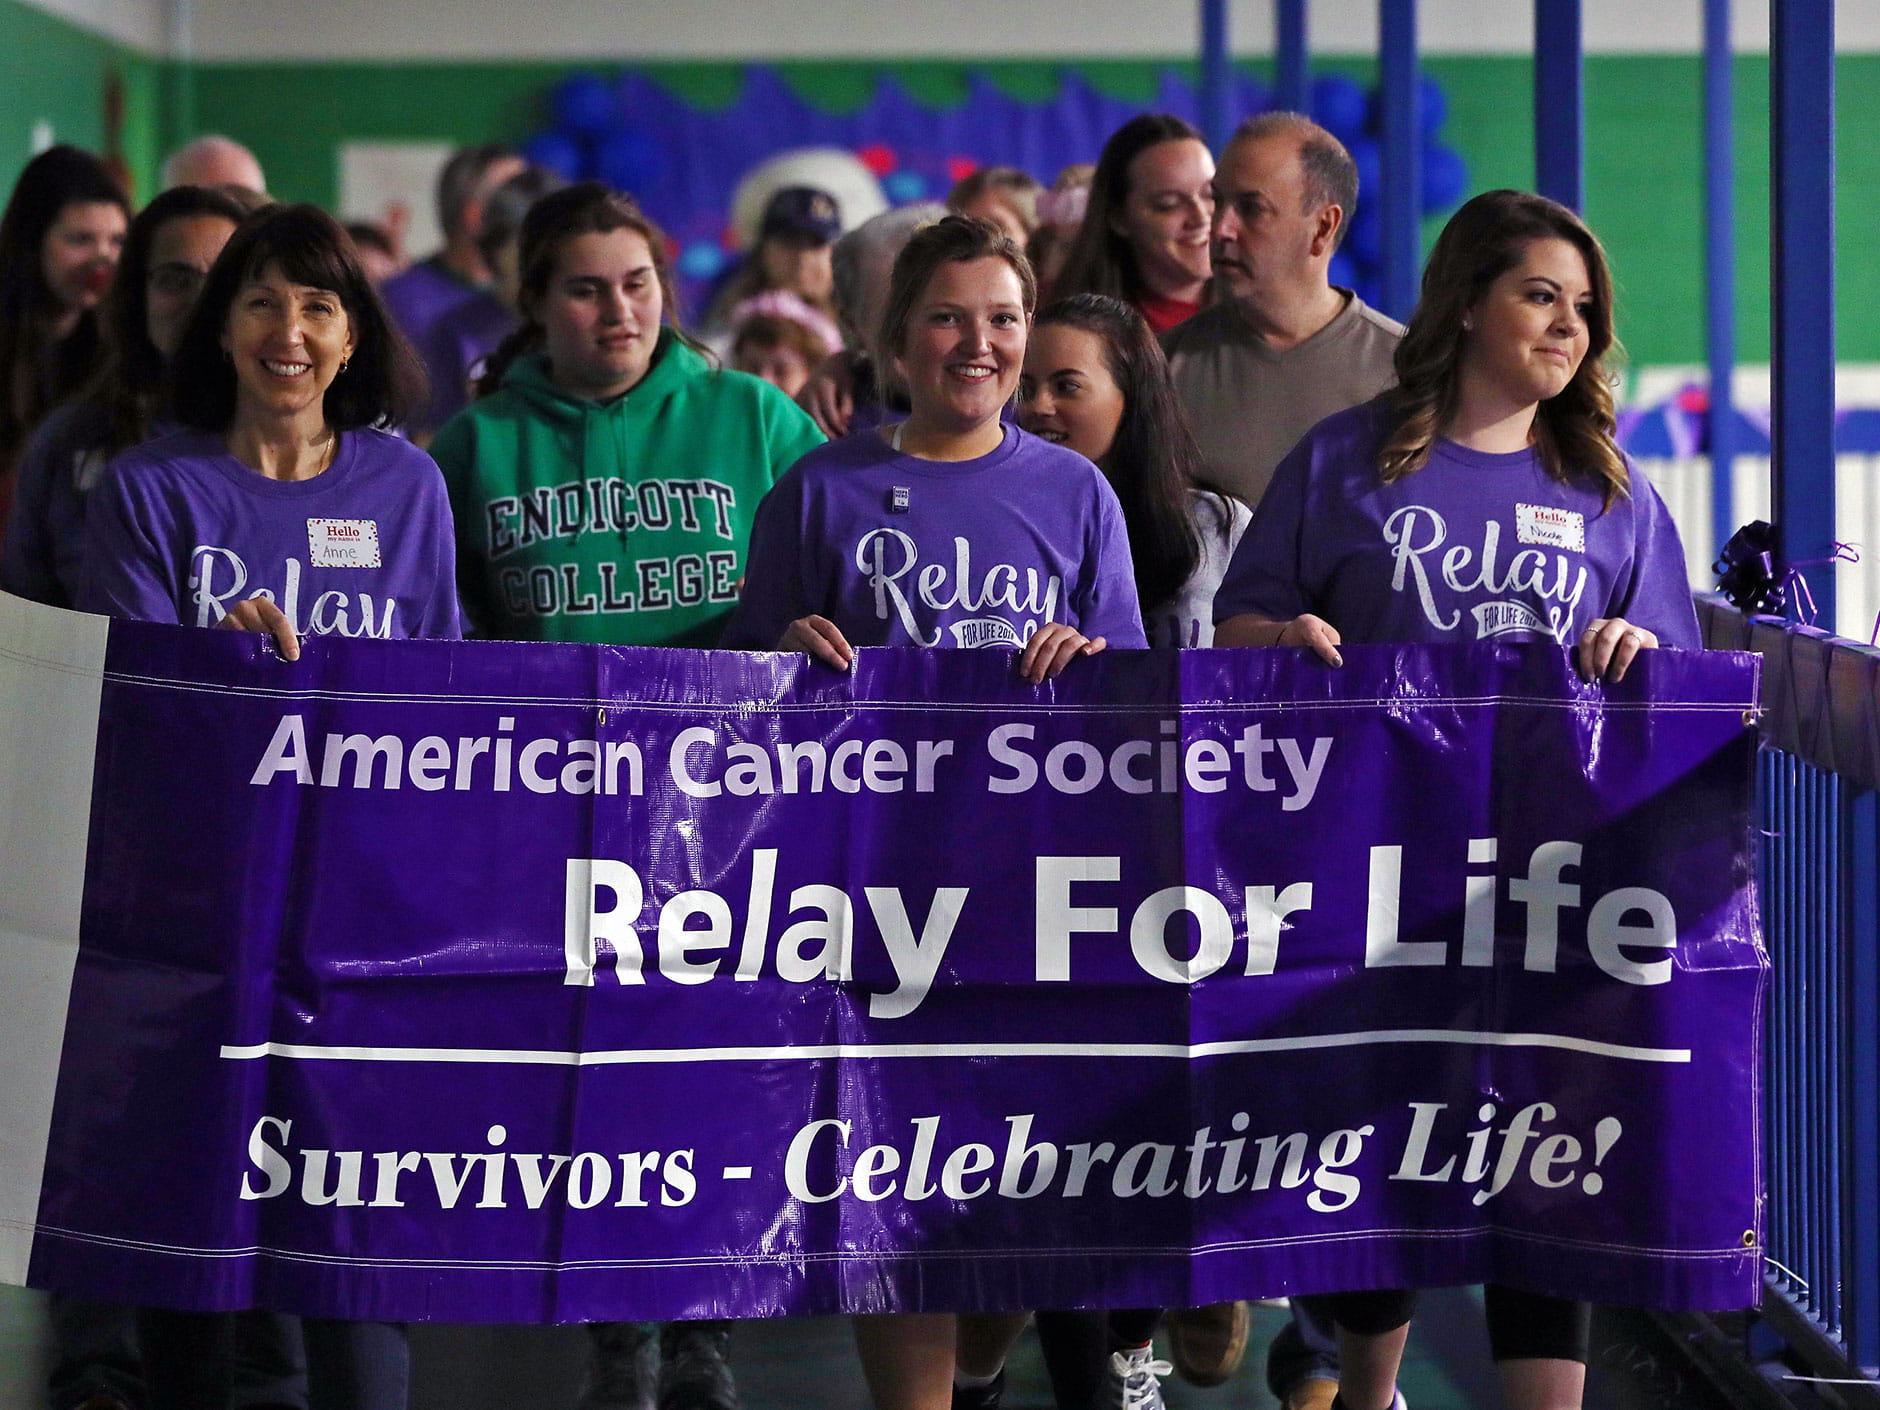 Relay for Life participants walking with a sign that reads "American Cancer Society, Relay for Life: Survivors—Celebrating Life!"